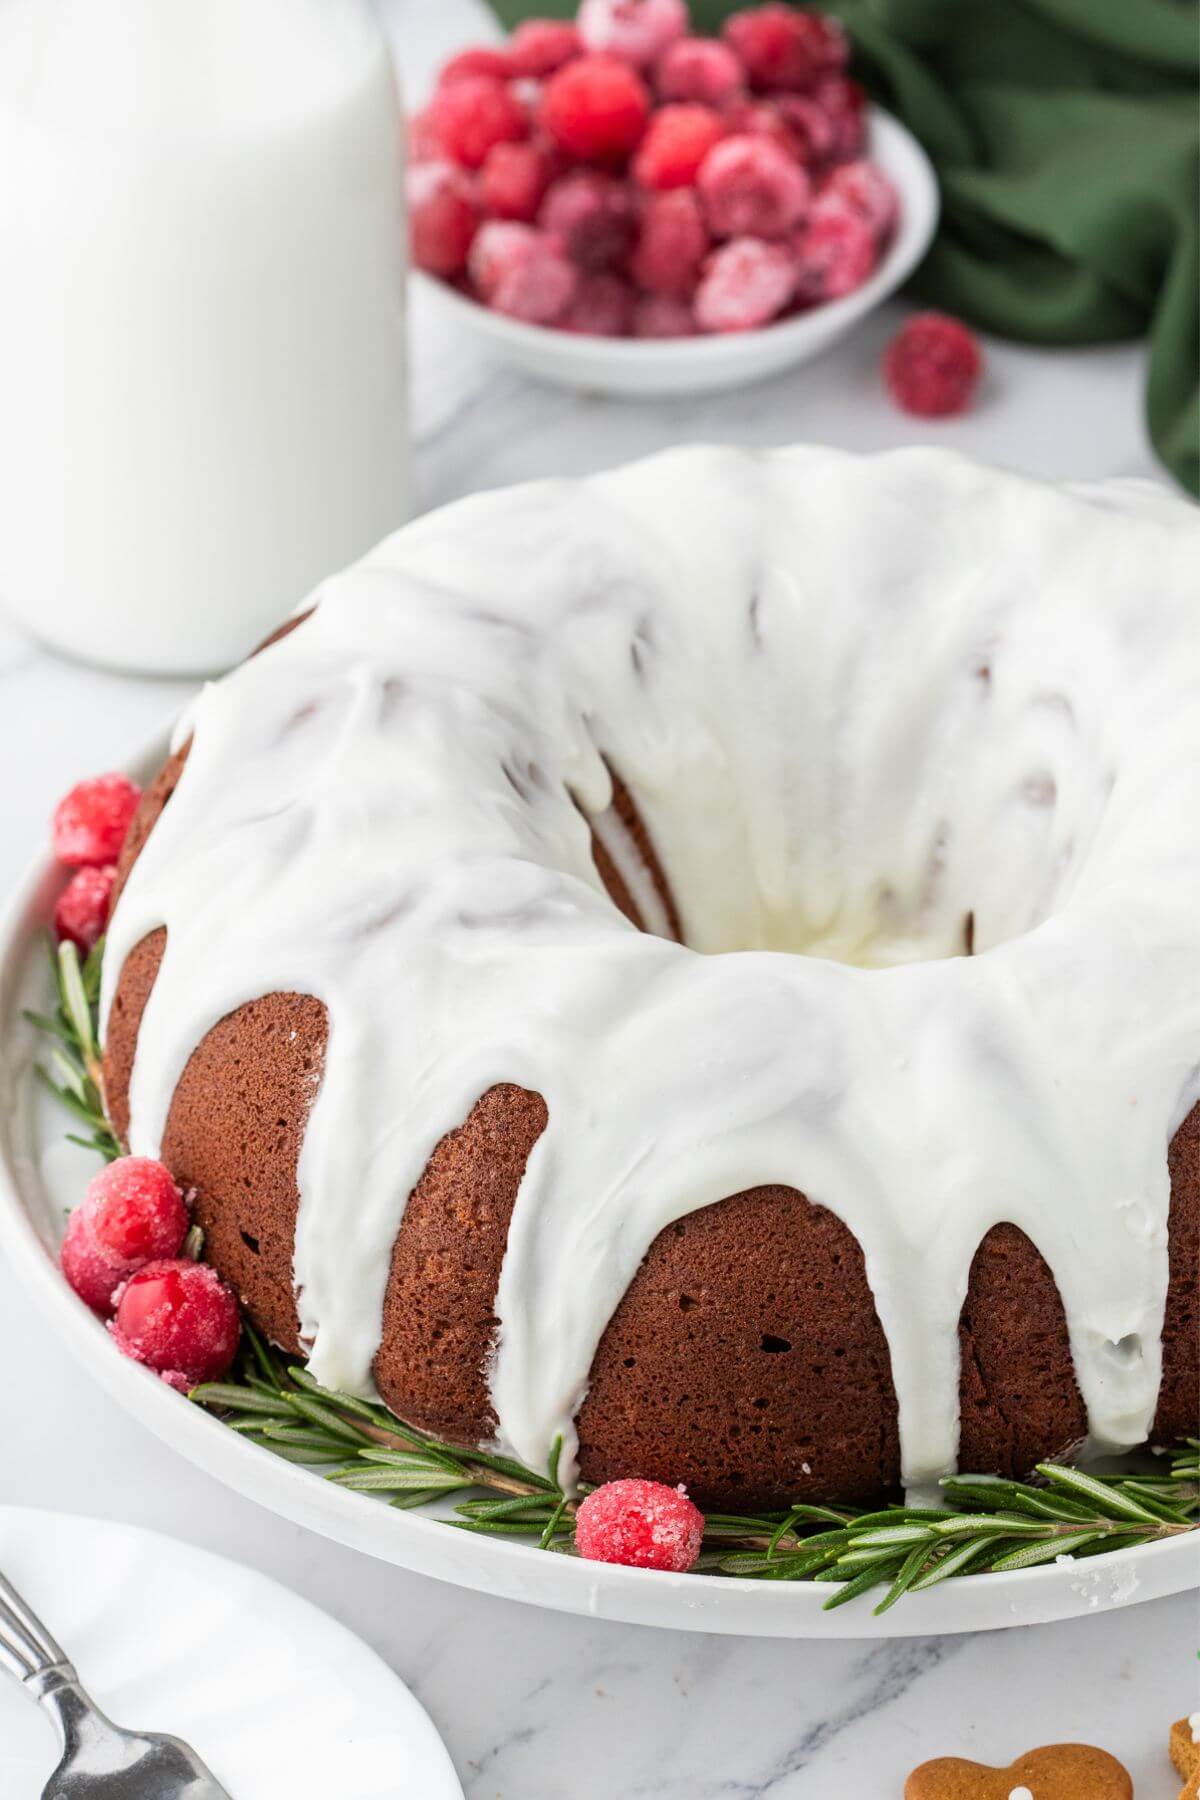 Whole gingerbread bundt cake iced with a bright white glaze and garnished with sugared cranberries and fresh rosemary.